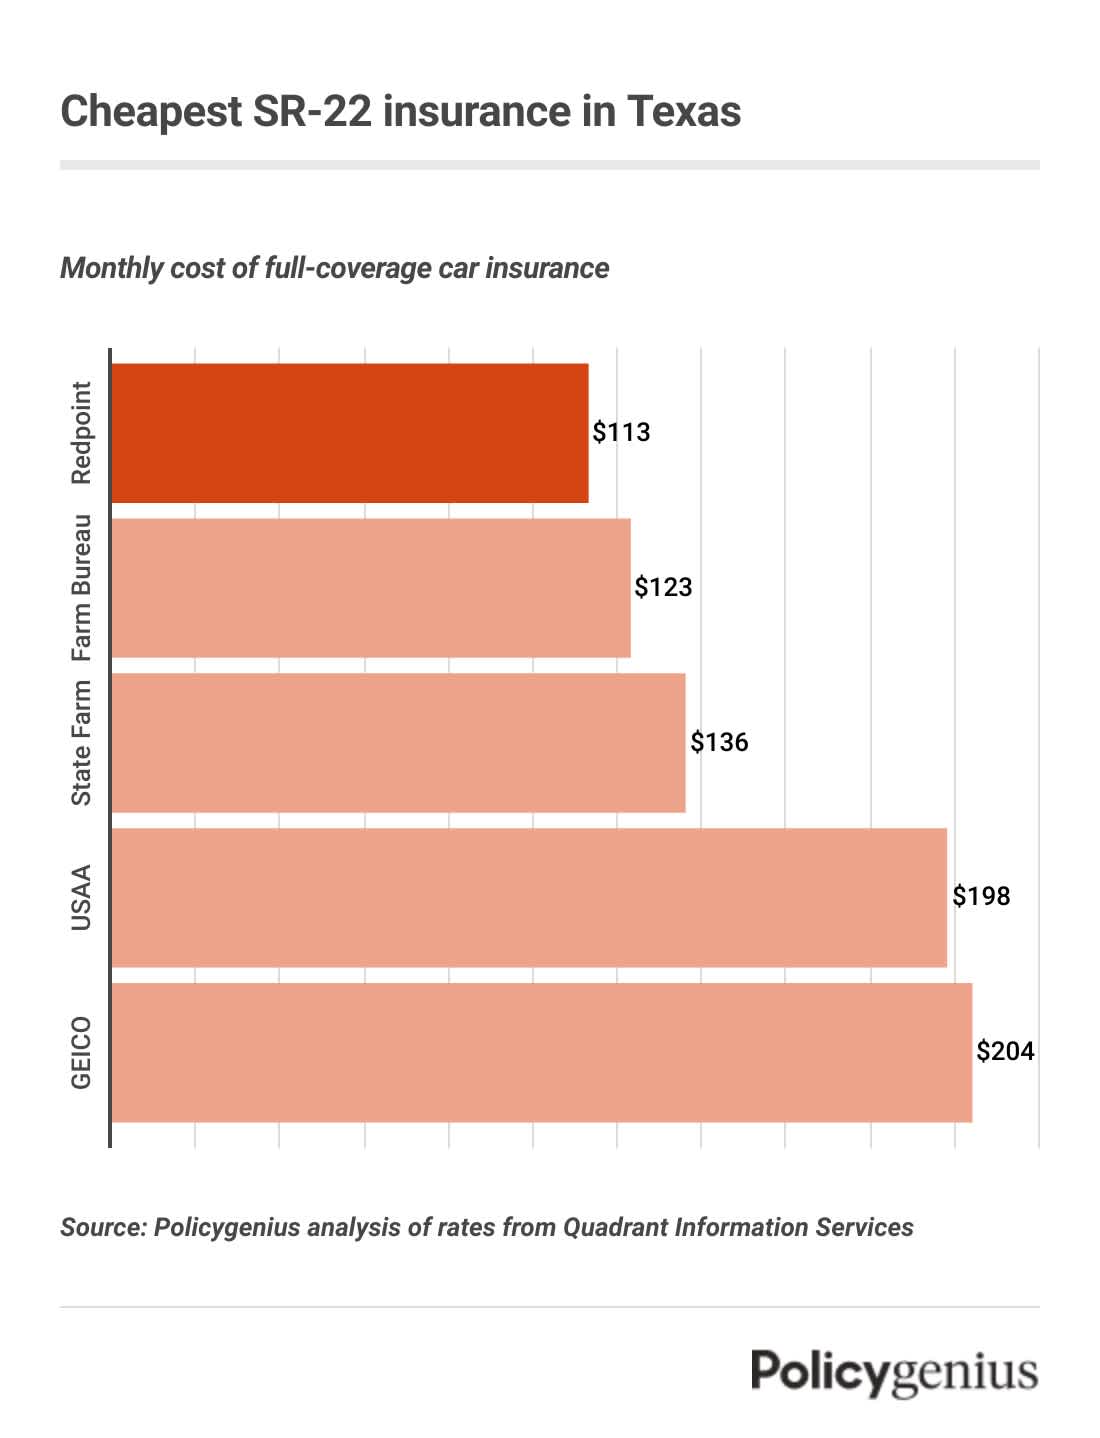 A bar graph showing the cheapest SR-22 insurance in Texas. The cheapest company is Redpoint.